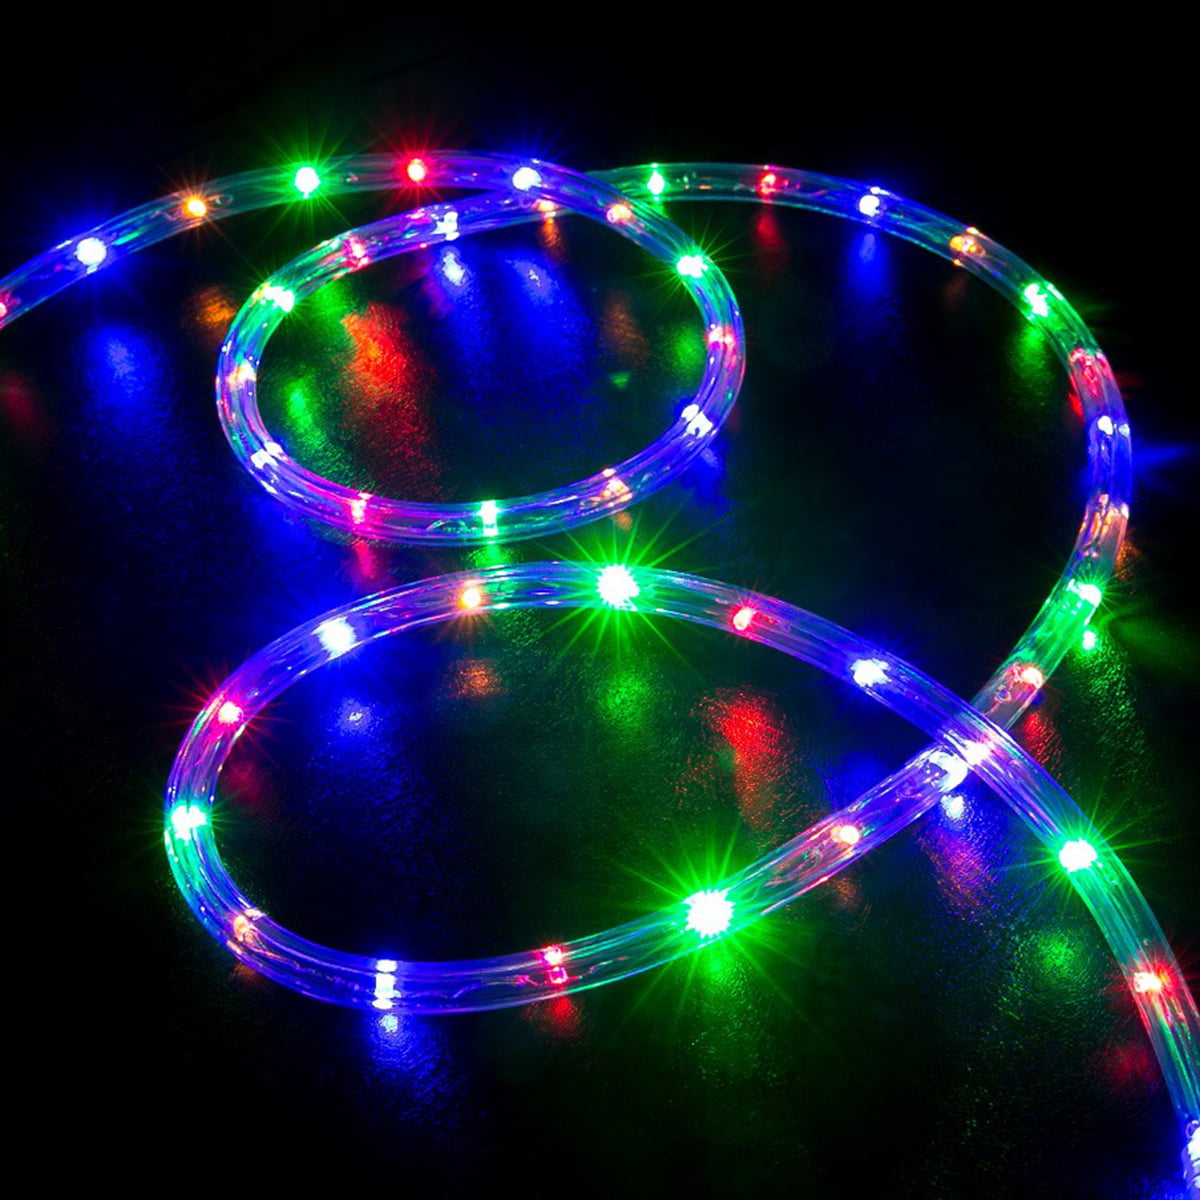 Details about   30M 300 LED Decorative LED String Light For Christmas Party Events AC 220V 